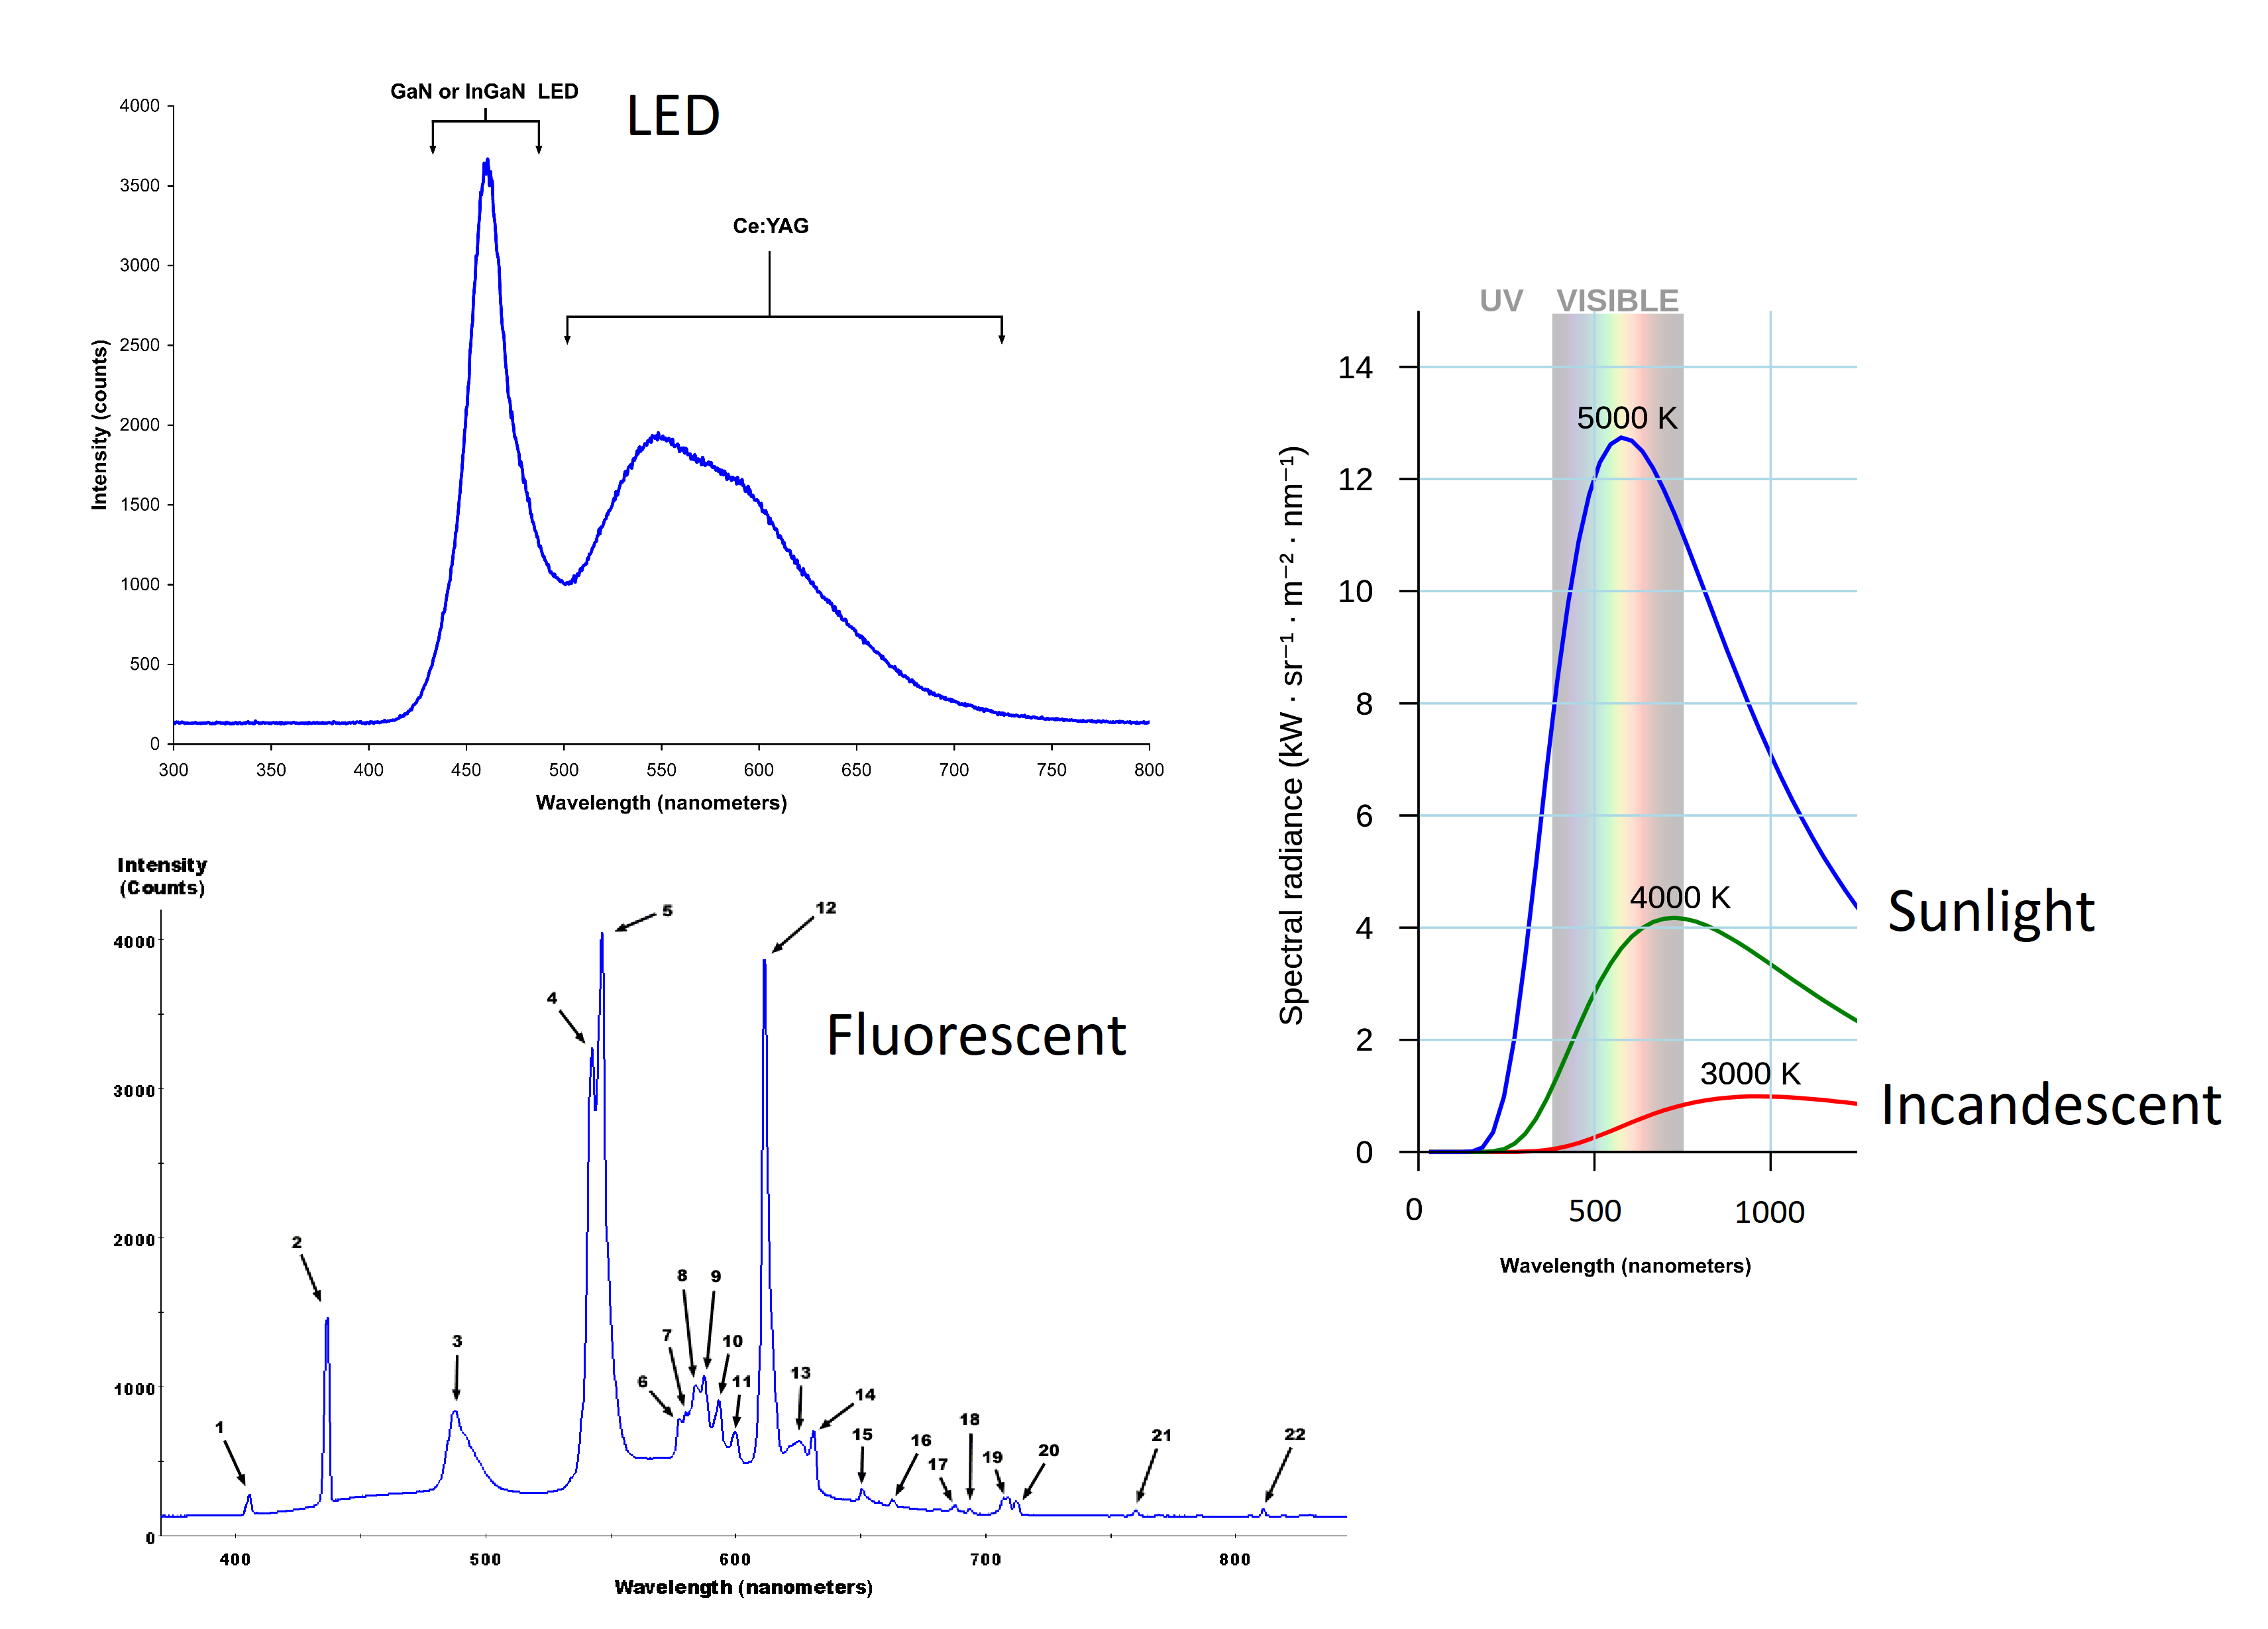 Spectra of different light sources